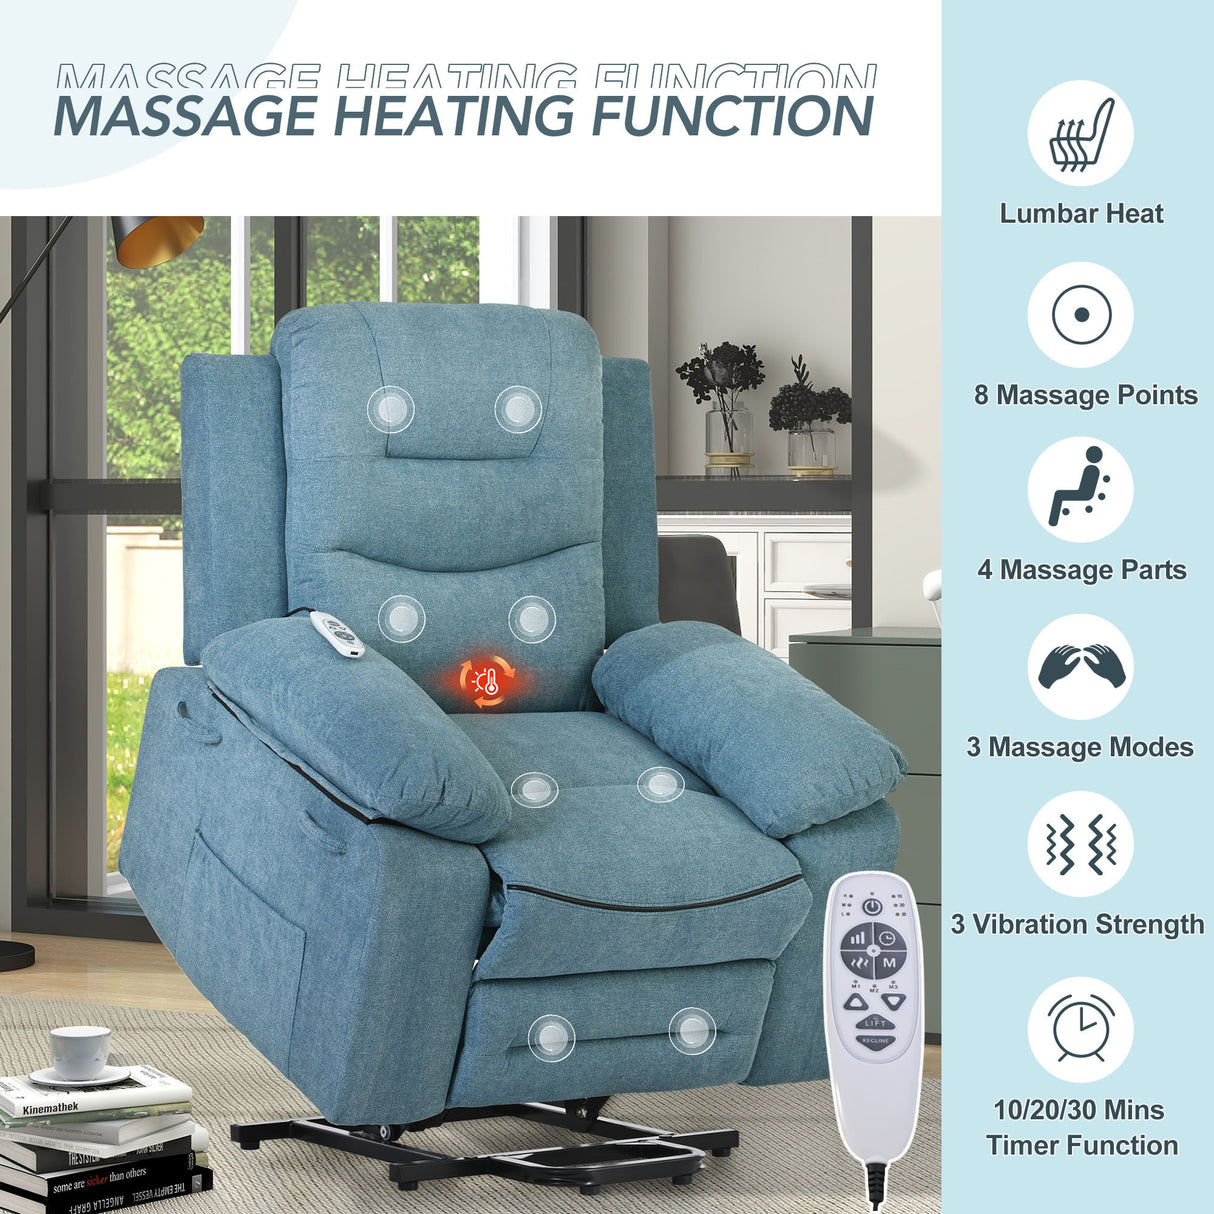 Massage Recliner,Power Lift Chair for Elderly with Adjustable Massage and Heating Function,Recliner Chair with Infinite Position and Side Pocket for Living Room ,Blue Home Elegance USA